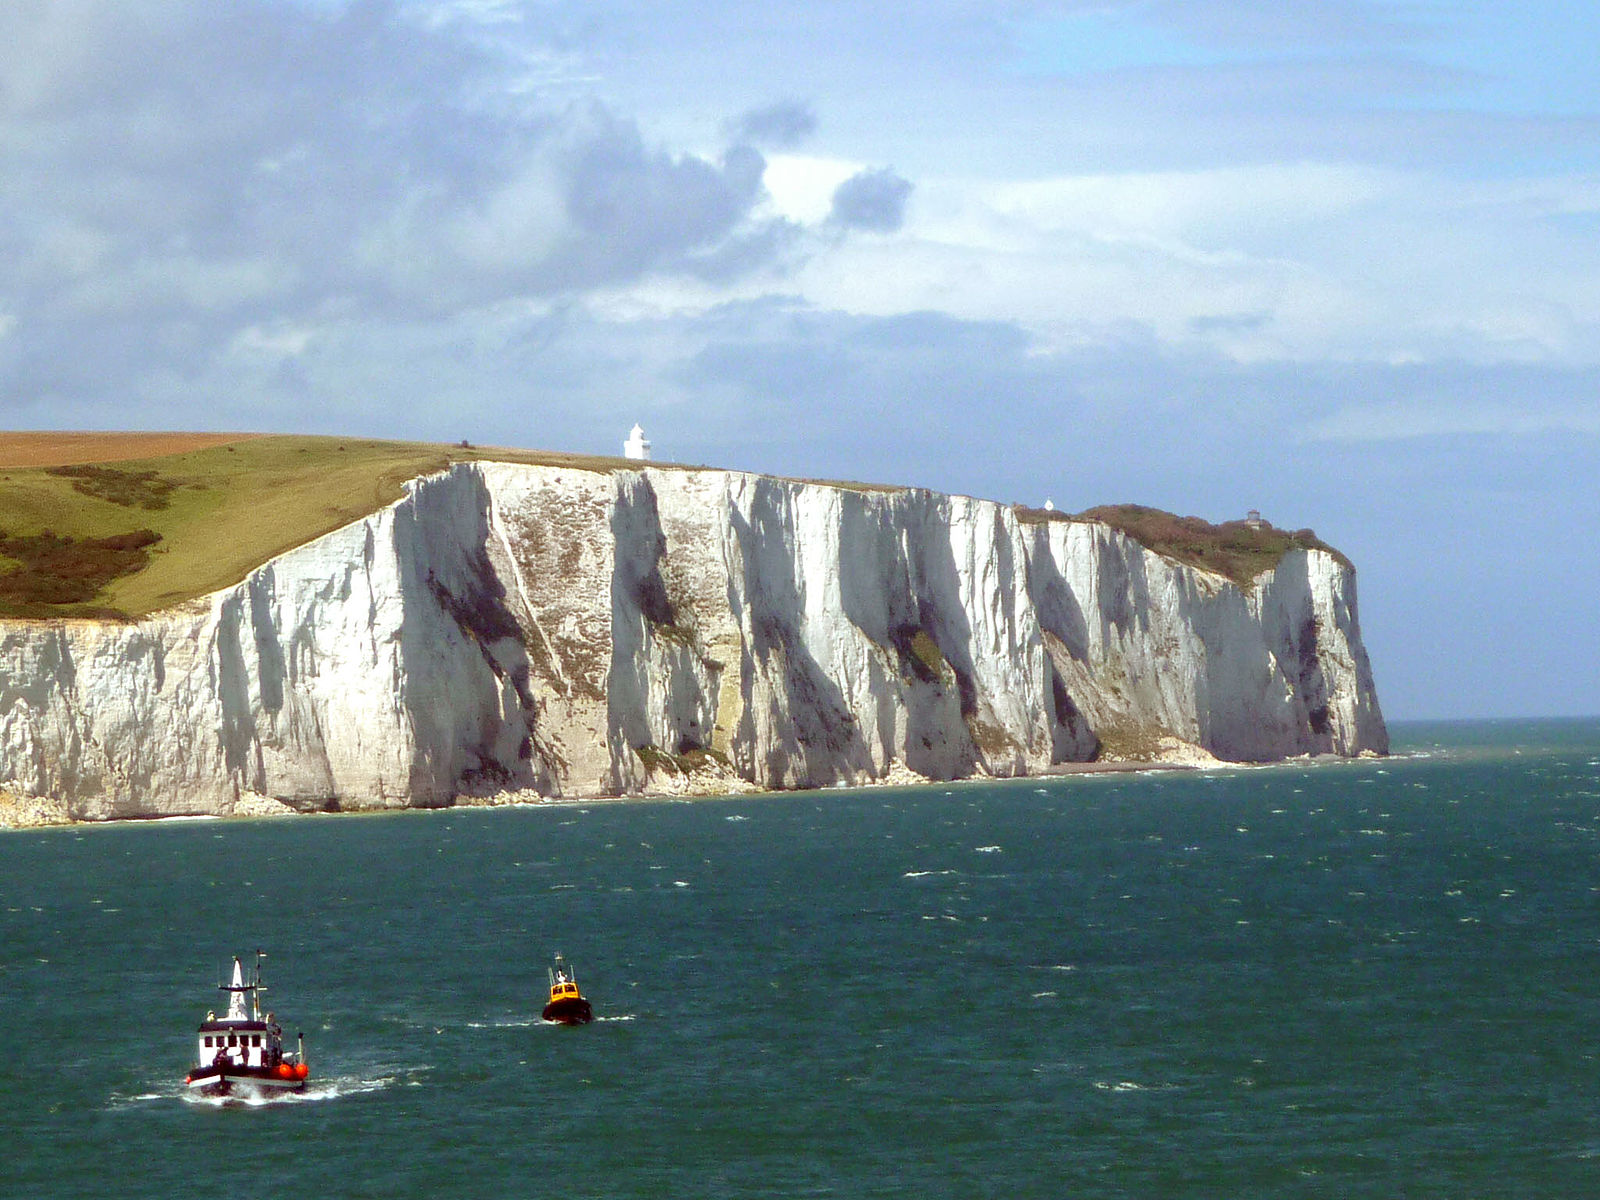 A photo of a steep, white cliff with grass growing on the hillside, below the cliff are the blue water and two boats